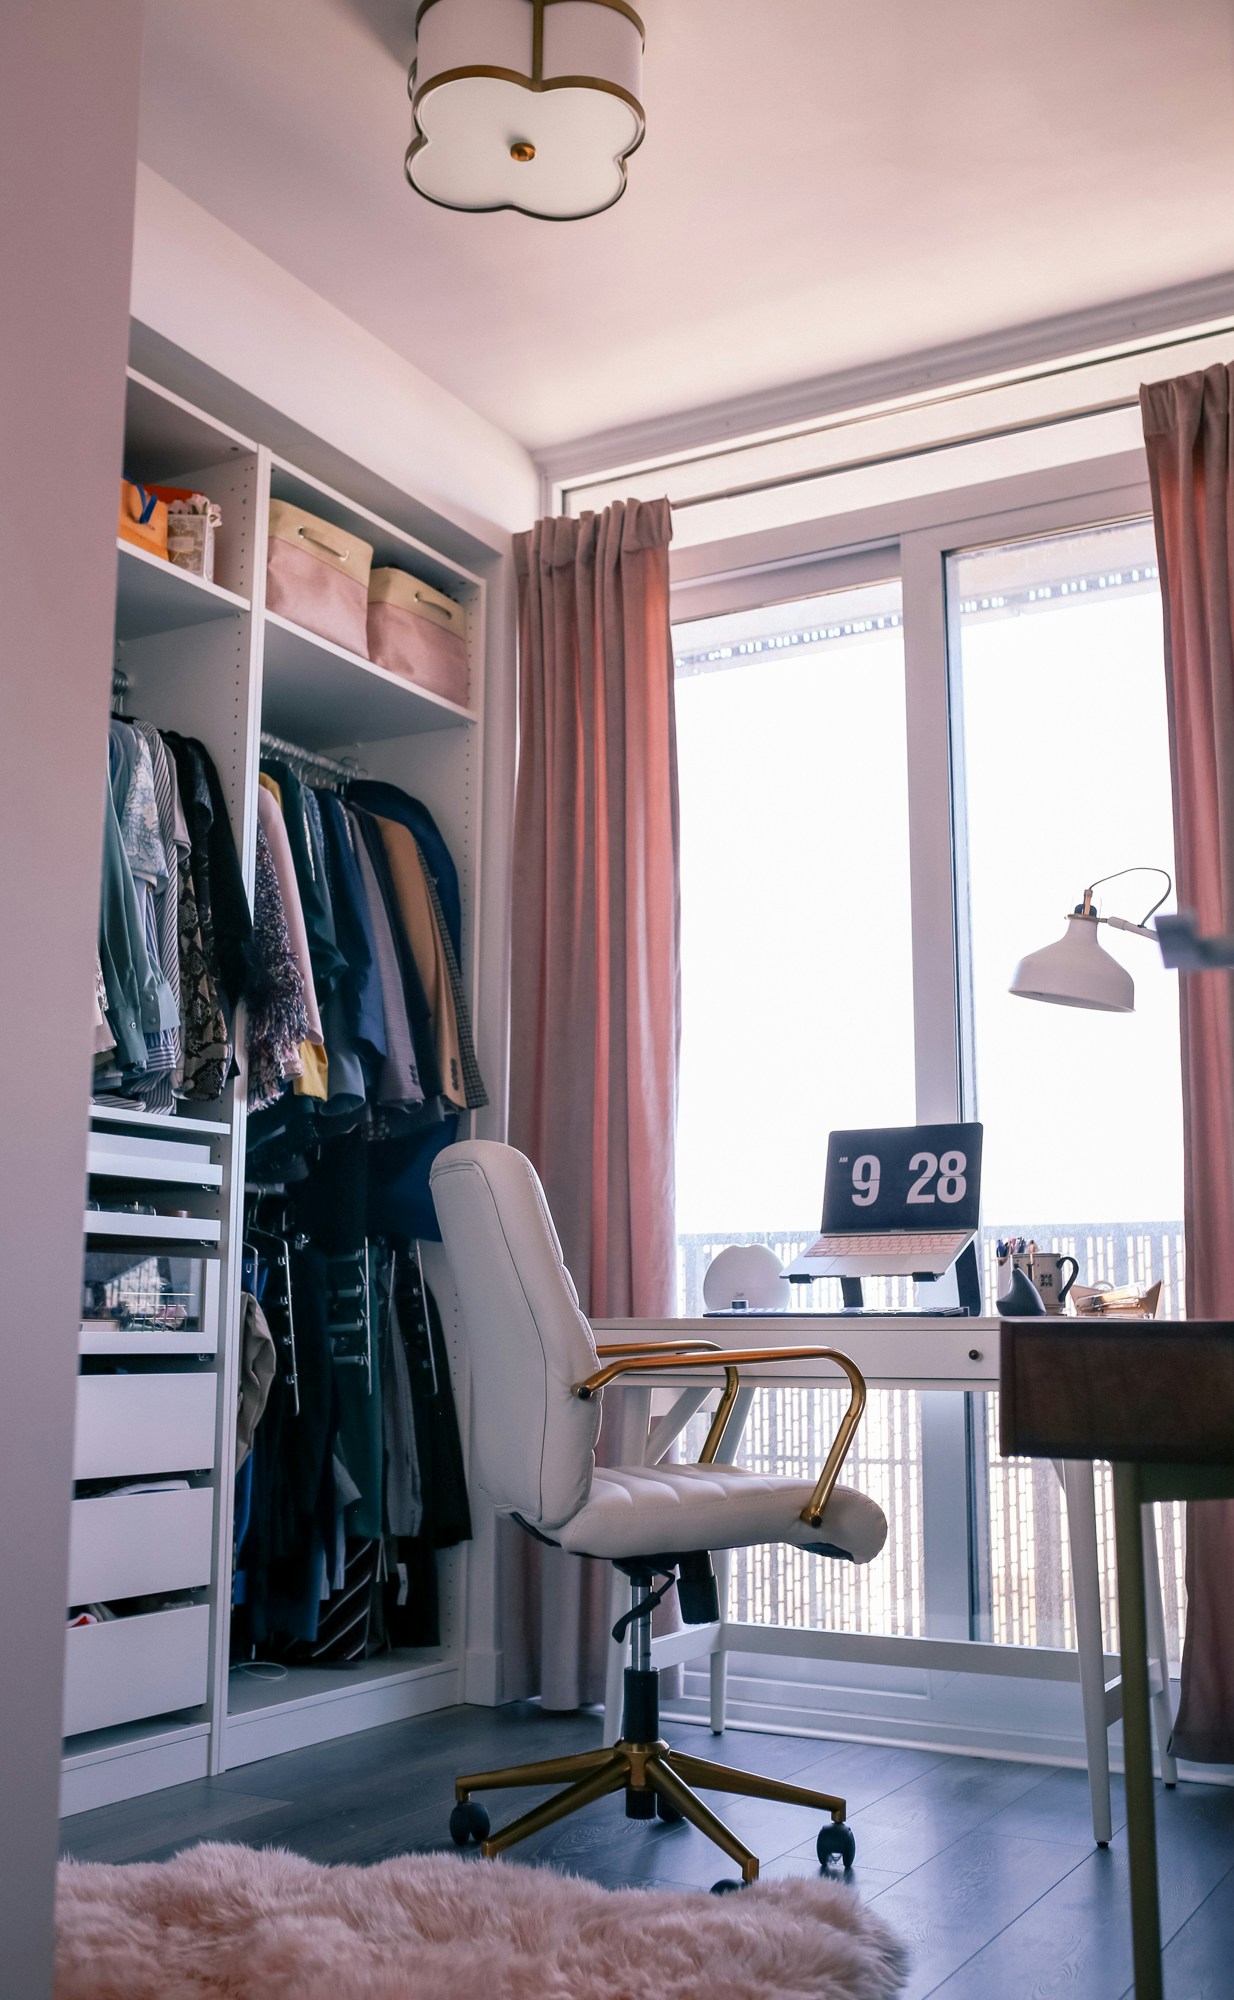 How to stay motivated during self-isolation: creating the perfect home office environment is key!